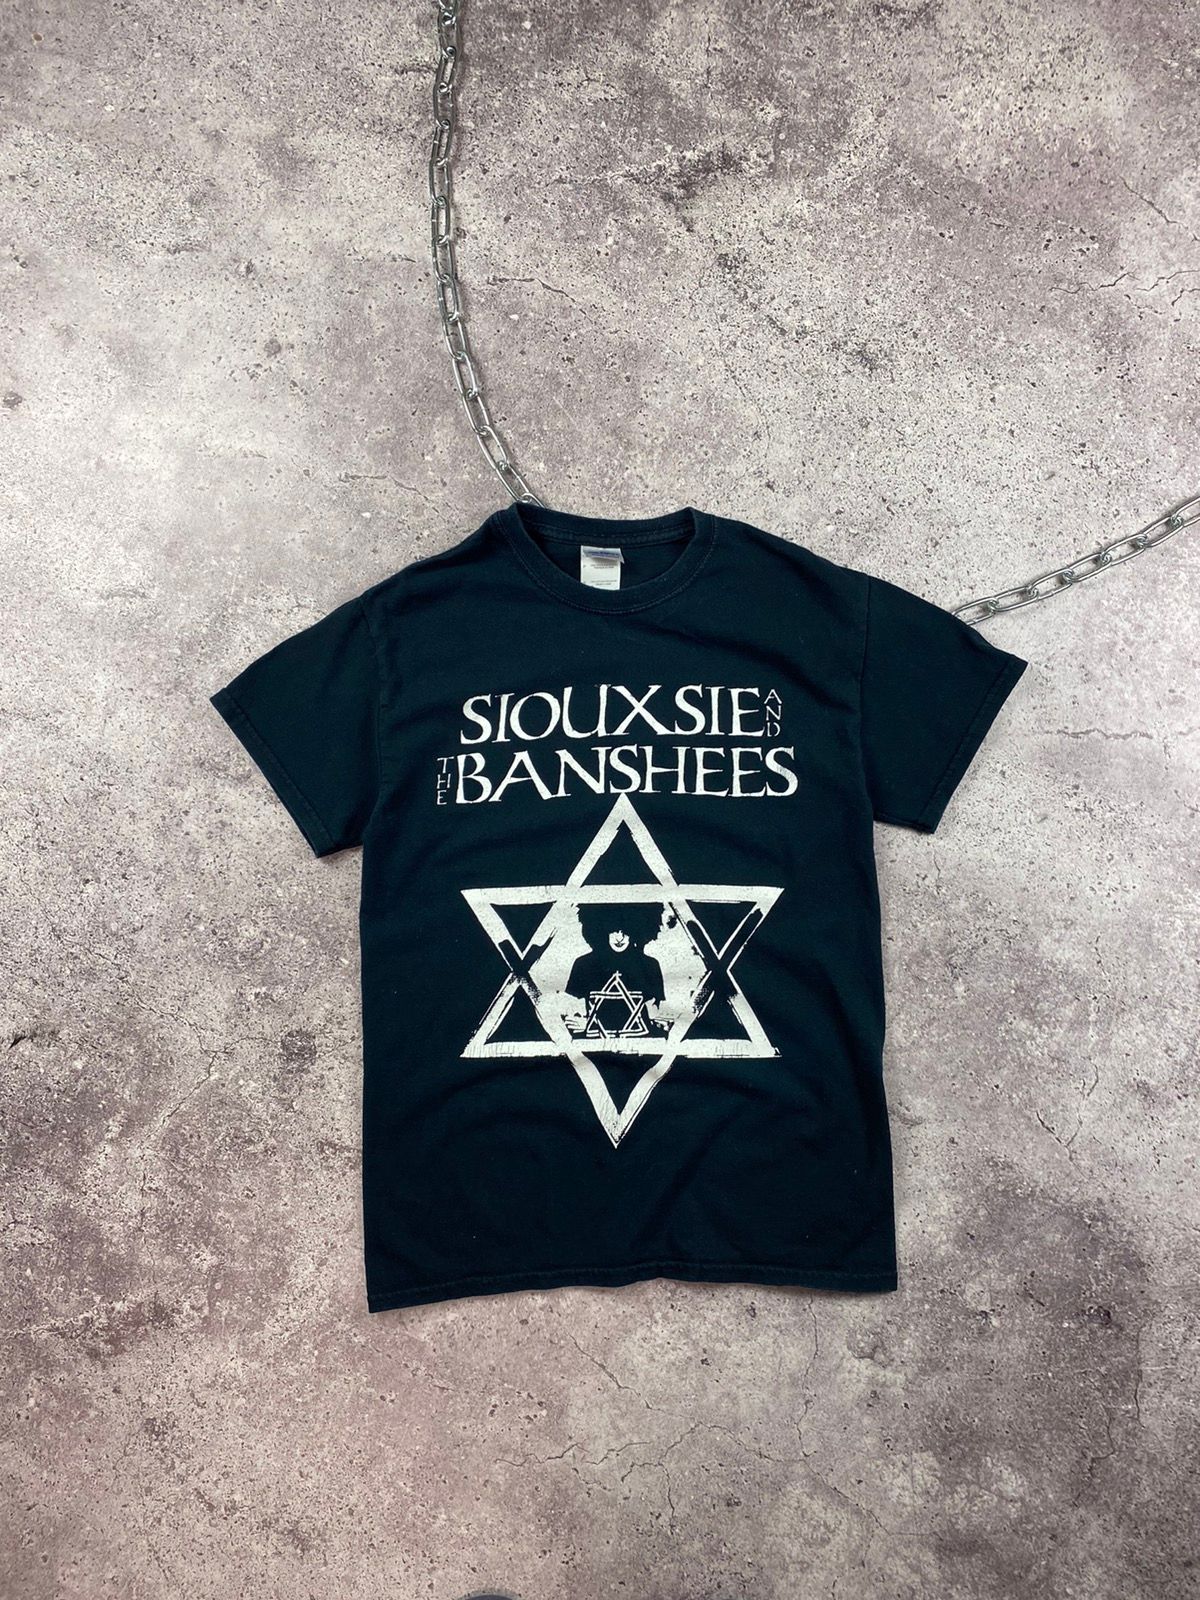 Vintage Vintage Siouxsie And The Banshees Tee Shirt Punk Faded Size US S / EU 44-46 / 1 - 6 Preview